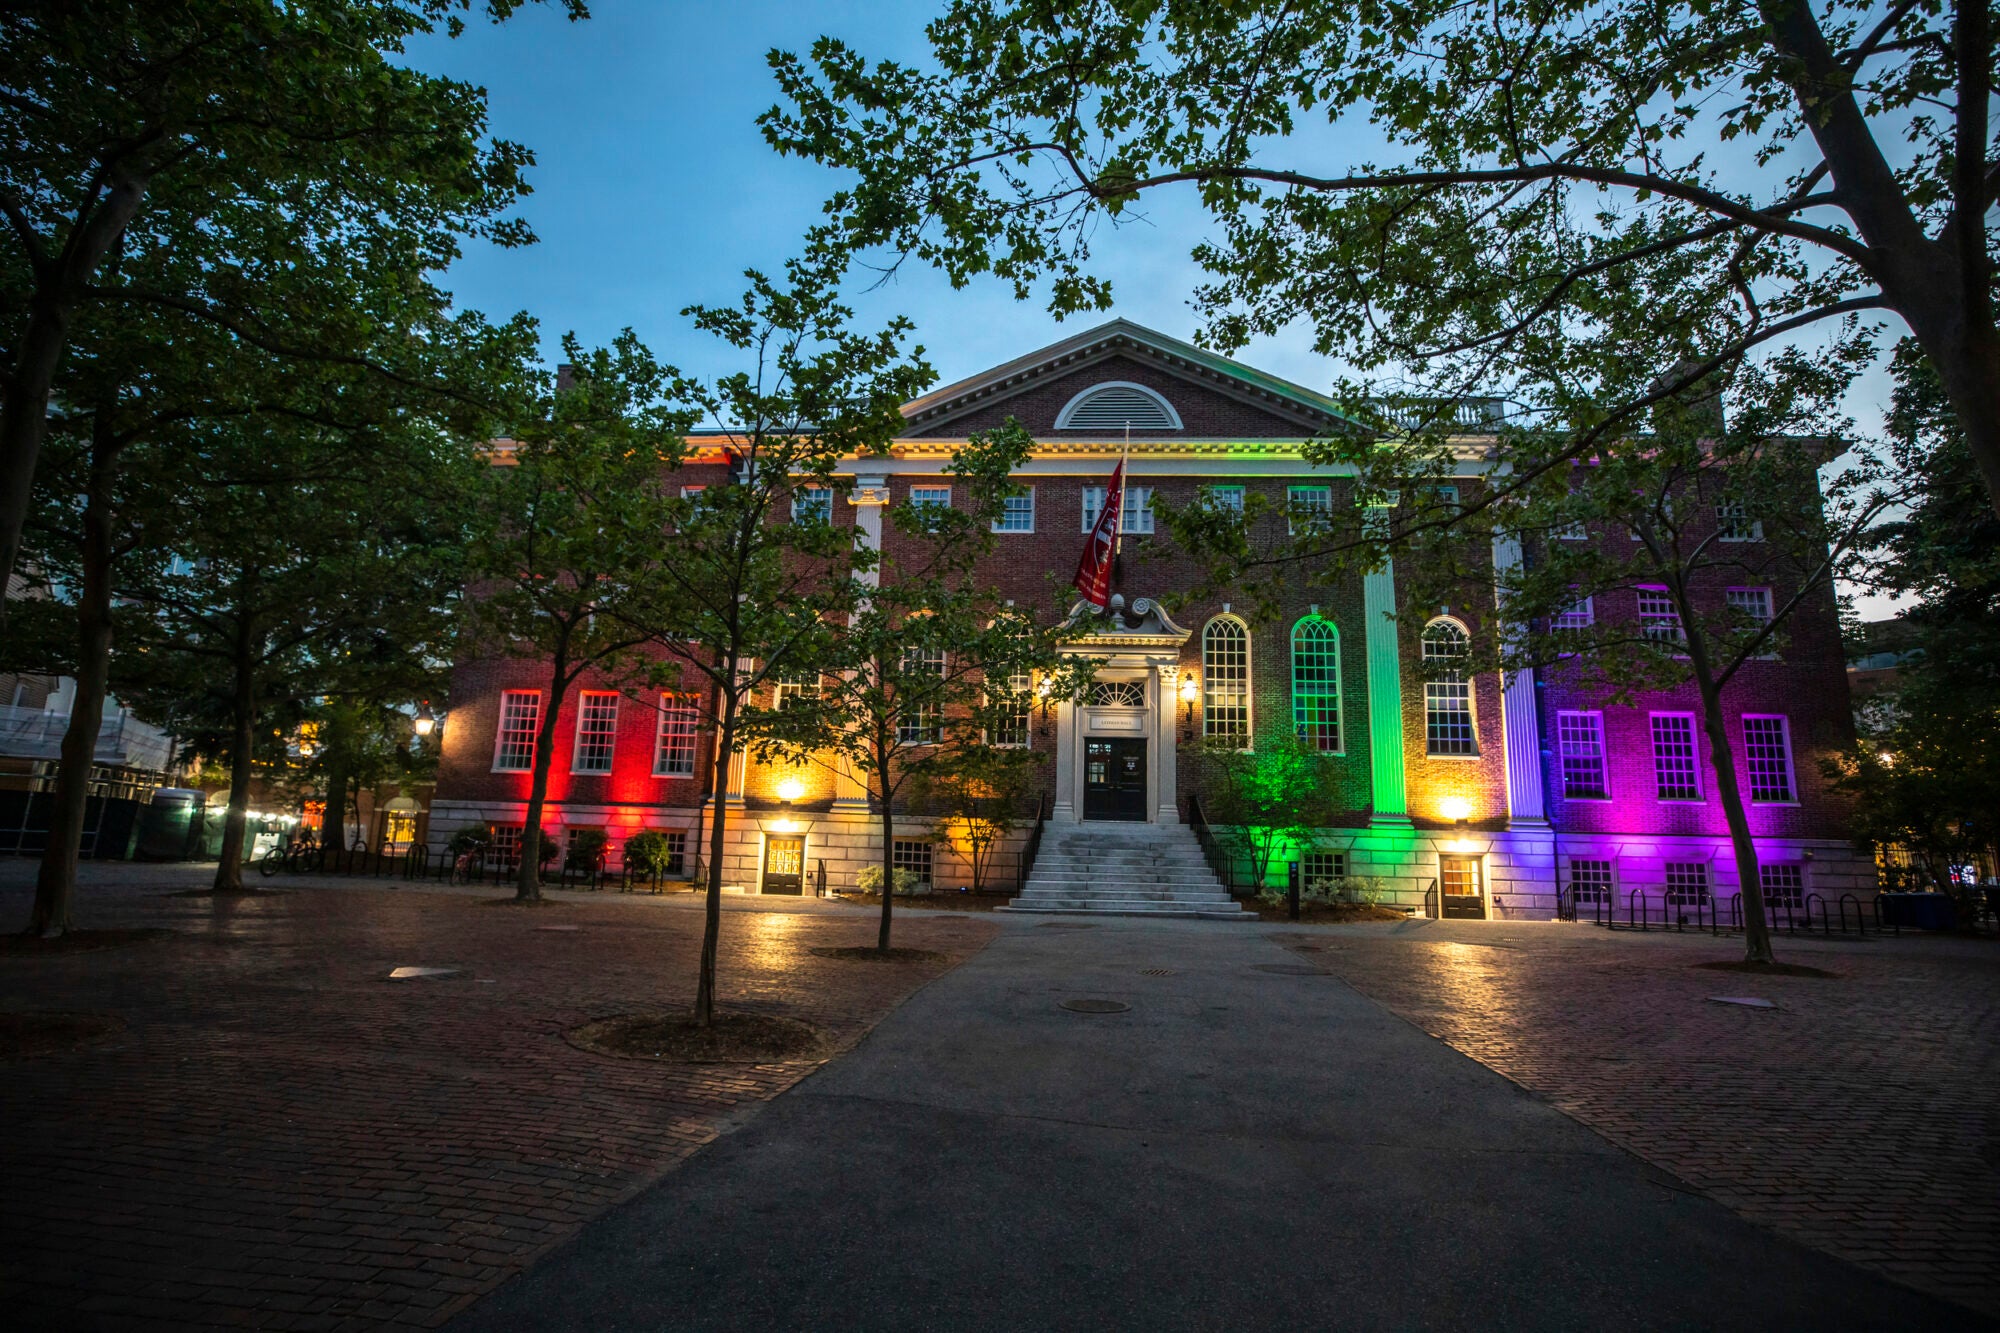 A building with rainbow color lights illuminating the front